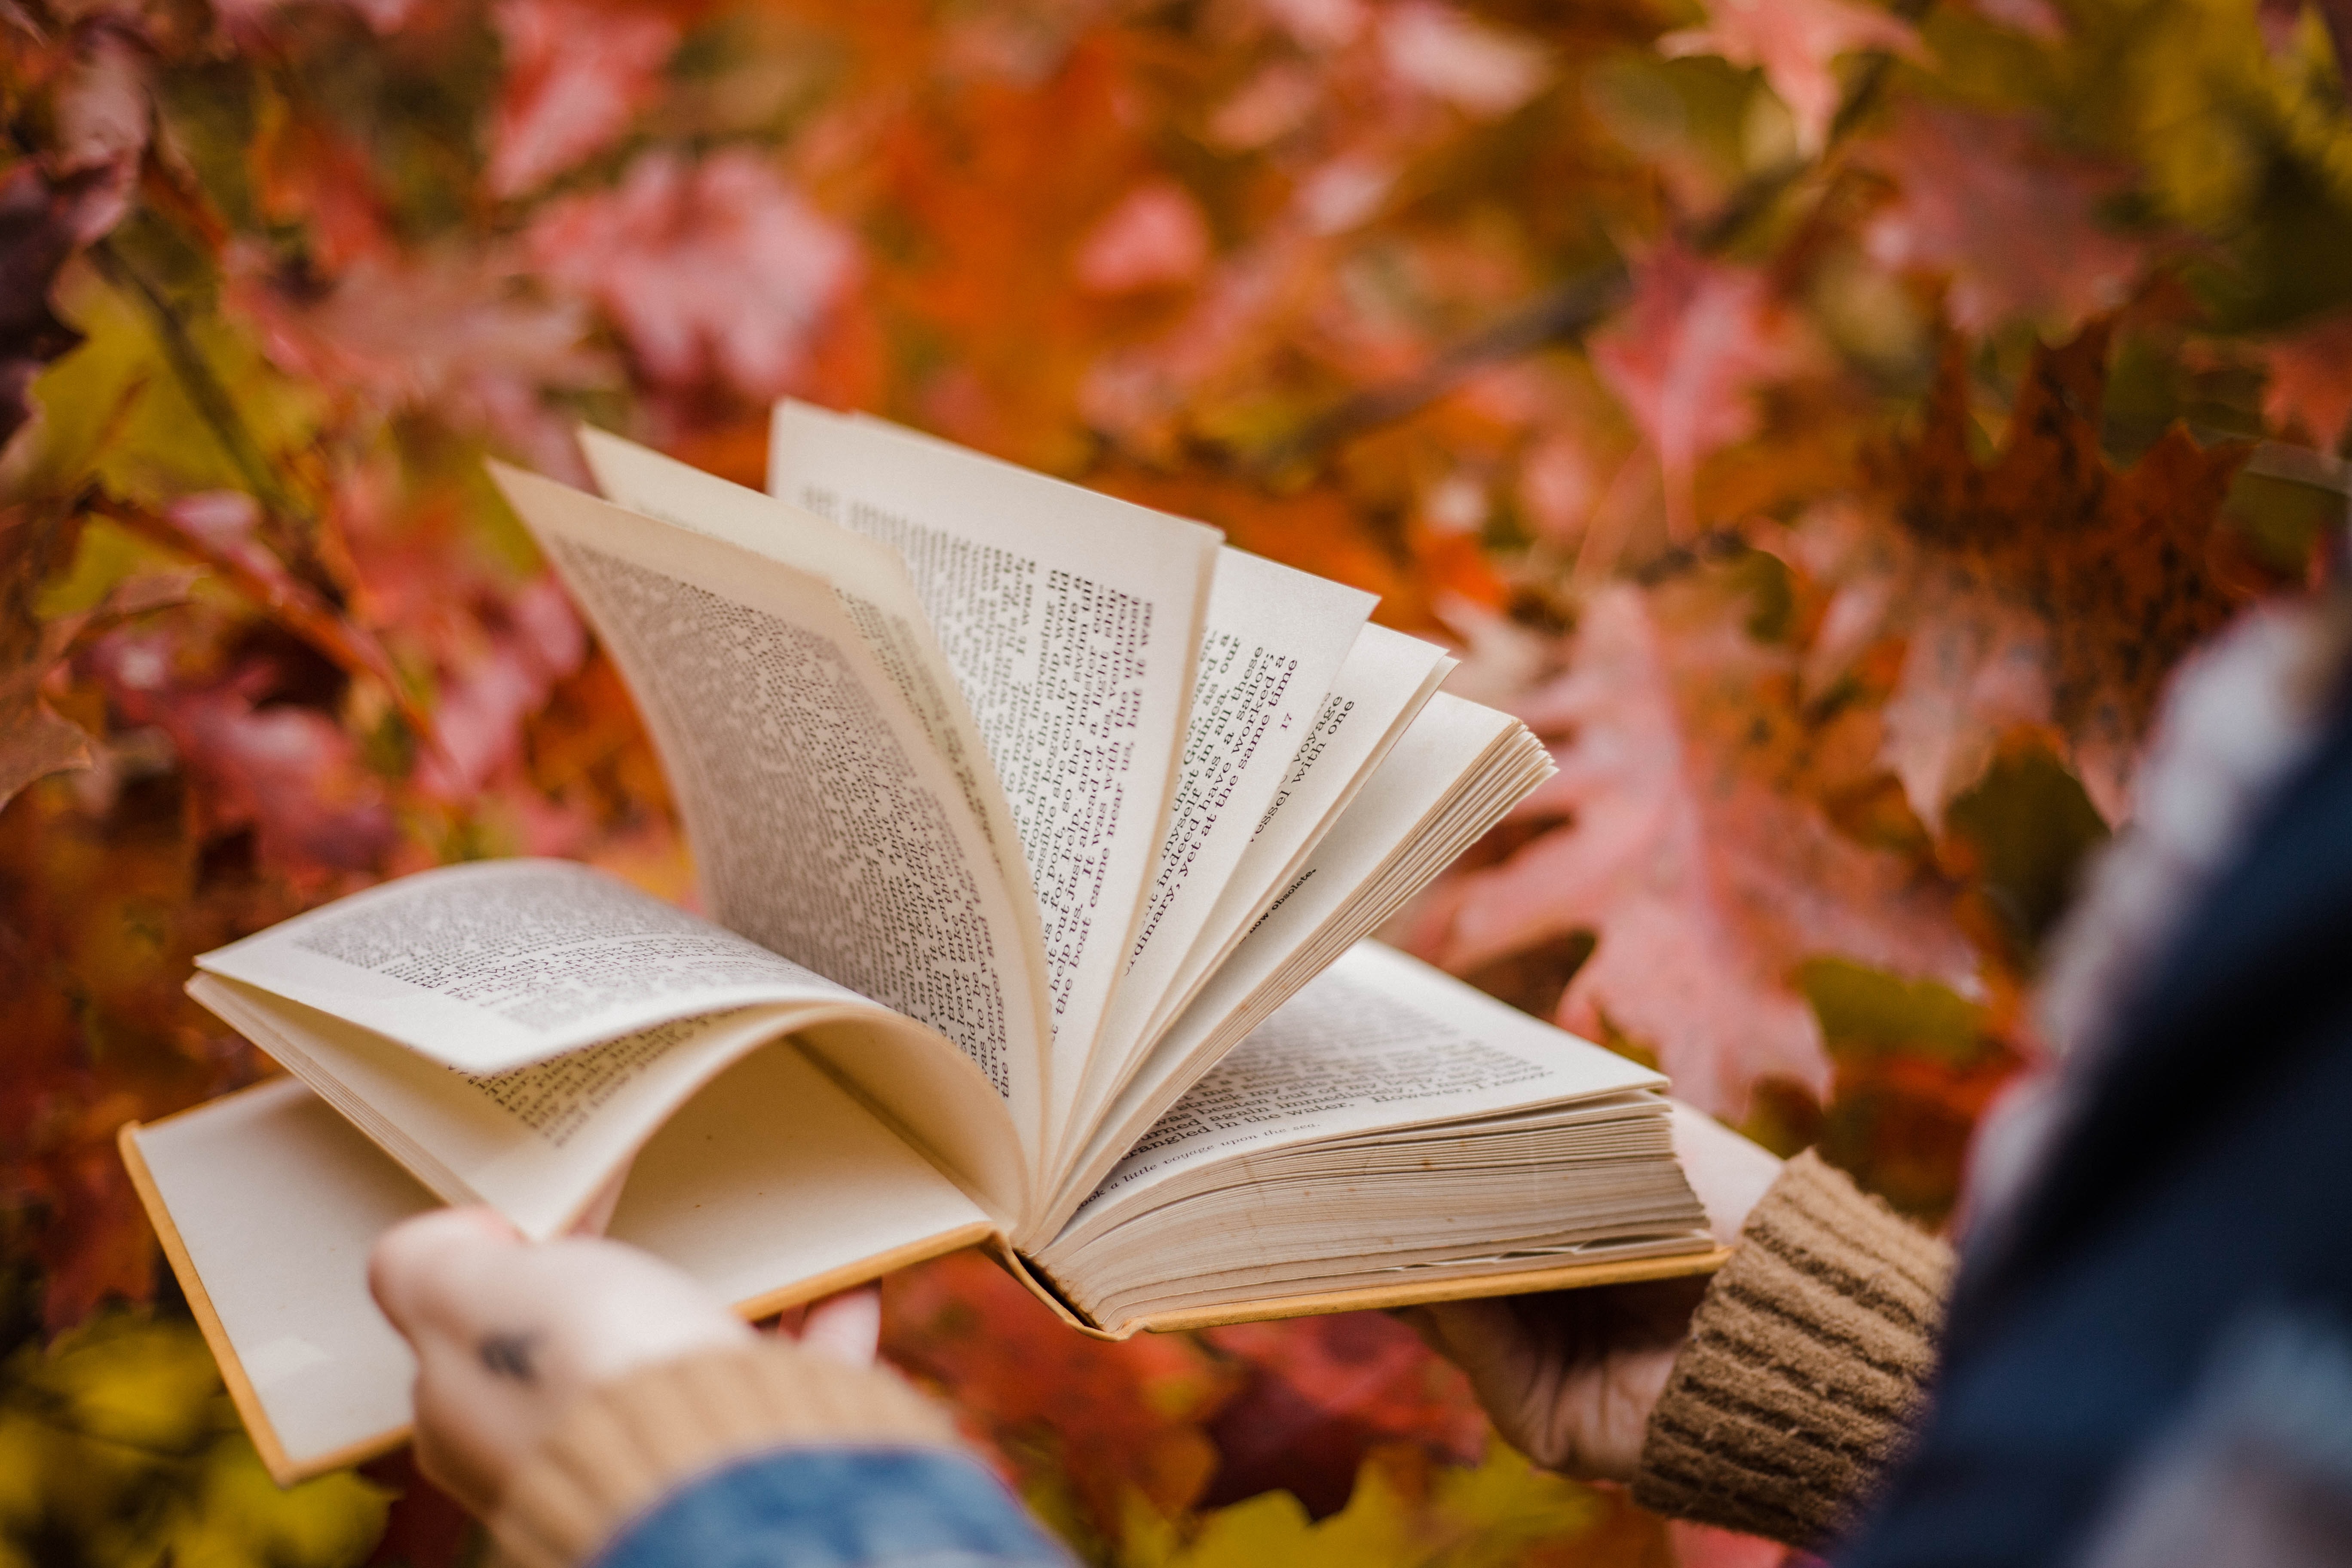 Nature Books; A Literary Remedy in a Time of Self-Isolation?